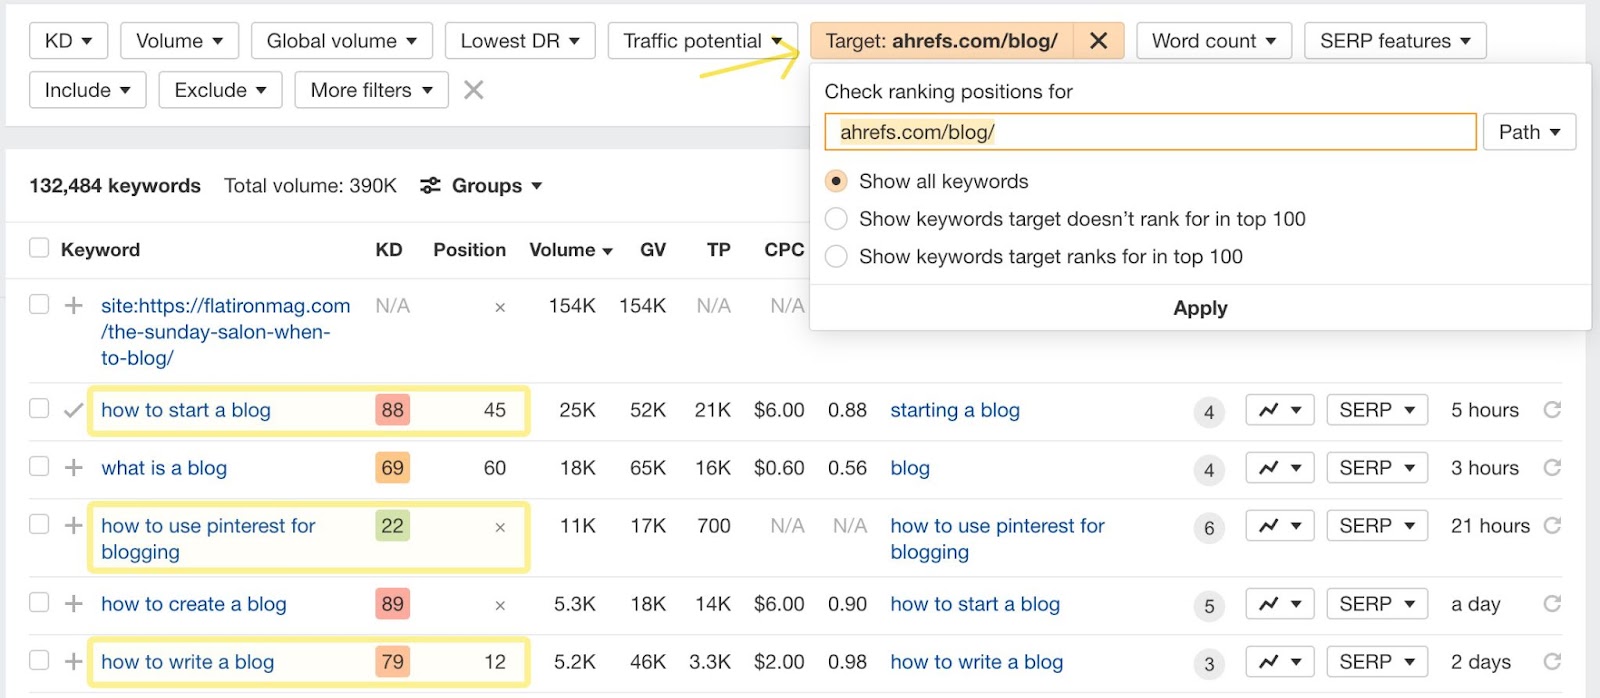 Setting target filter for ahrefs.com/blog in path mode